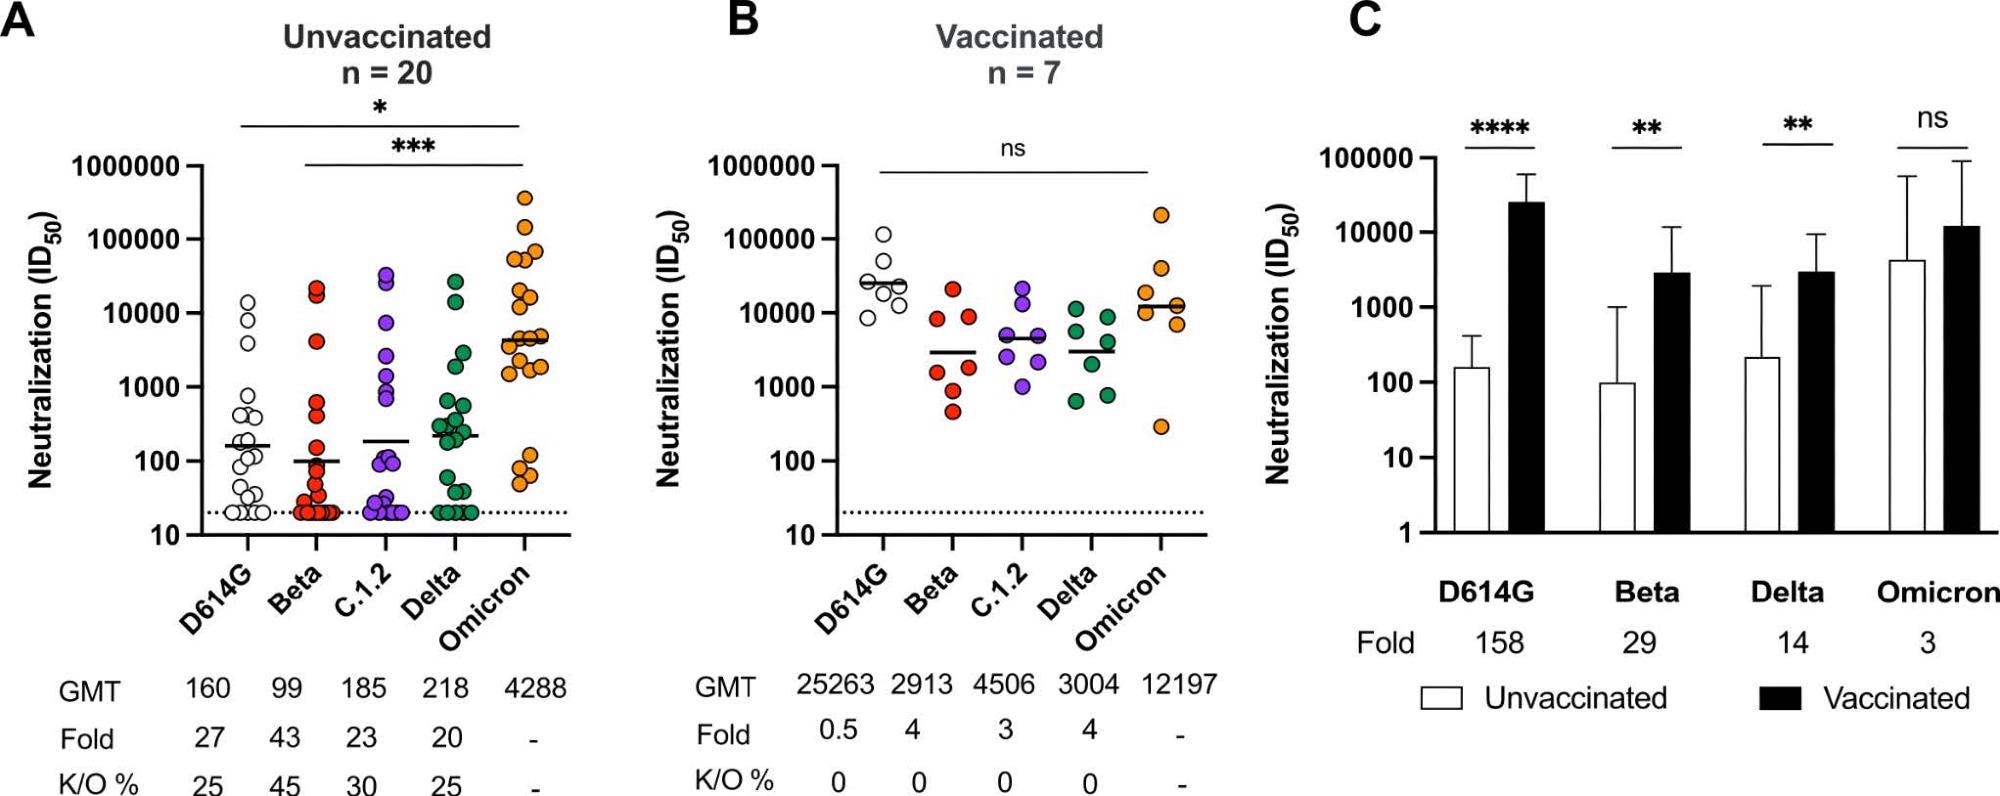 Omicron triggers cross-variant neutralizing antibodies which are broadened by vaccination Neutralization titer (ID50) of Omicron-infected plasma against D614G, Beta, C.1.2, Delta and Omicron pseudoviruses shown for (A) unvaccinated individuals (n=20) or (B) individuals vaccinated with either one dose of Ad26.CoV.2S or two doses of BNT162b2 (n=7). Lines indicate geometric mean titer (GMT) also represented below the plot with fold decrease and knockout (K/O) of activity for other variants as a percentage relative to Omicron. Dotted lines indicate the limit of detection of the assay. Statistical significance across variants is shown by Friedman test with Dunns correction. (C) Bars show geometric mean neutralization titers for vaccinated (black) and unvaccinated (white) individuals against variants of concern with error bars showing standard deviations with fold decreases relative to vaccinated individuals indicated below the plot. Statistical significance between vaccinated and unvaccinated samples by the Mann Whitney test. *p<0.05; **p<0.01; ***p<0.001; ****p<0.0001 and ns = non-significant.